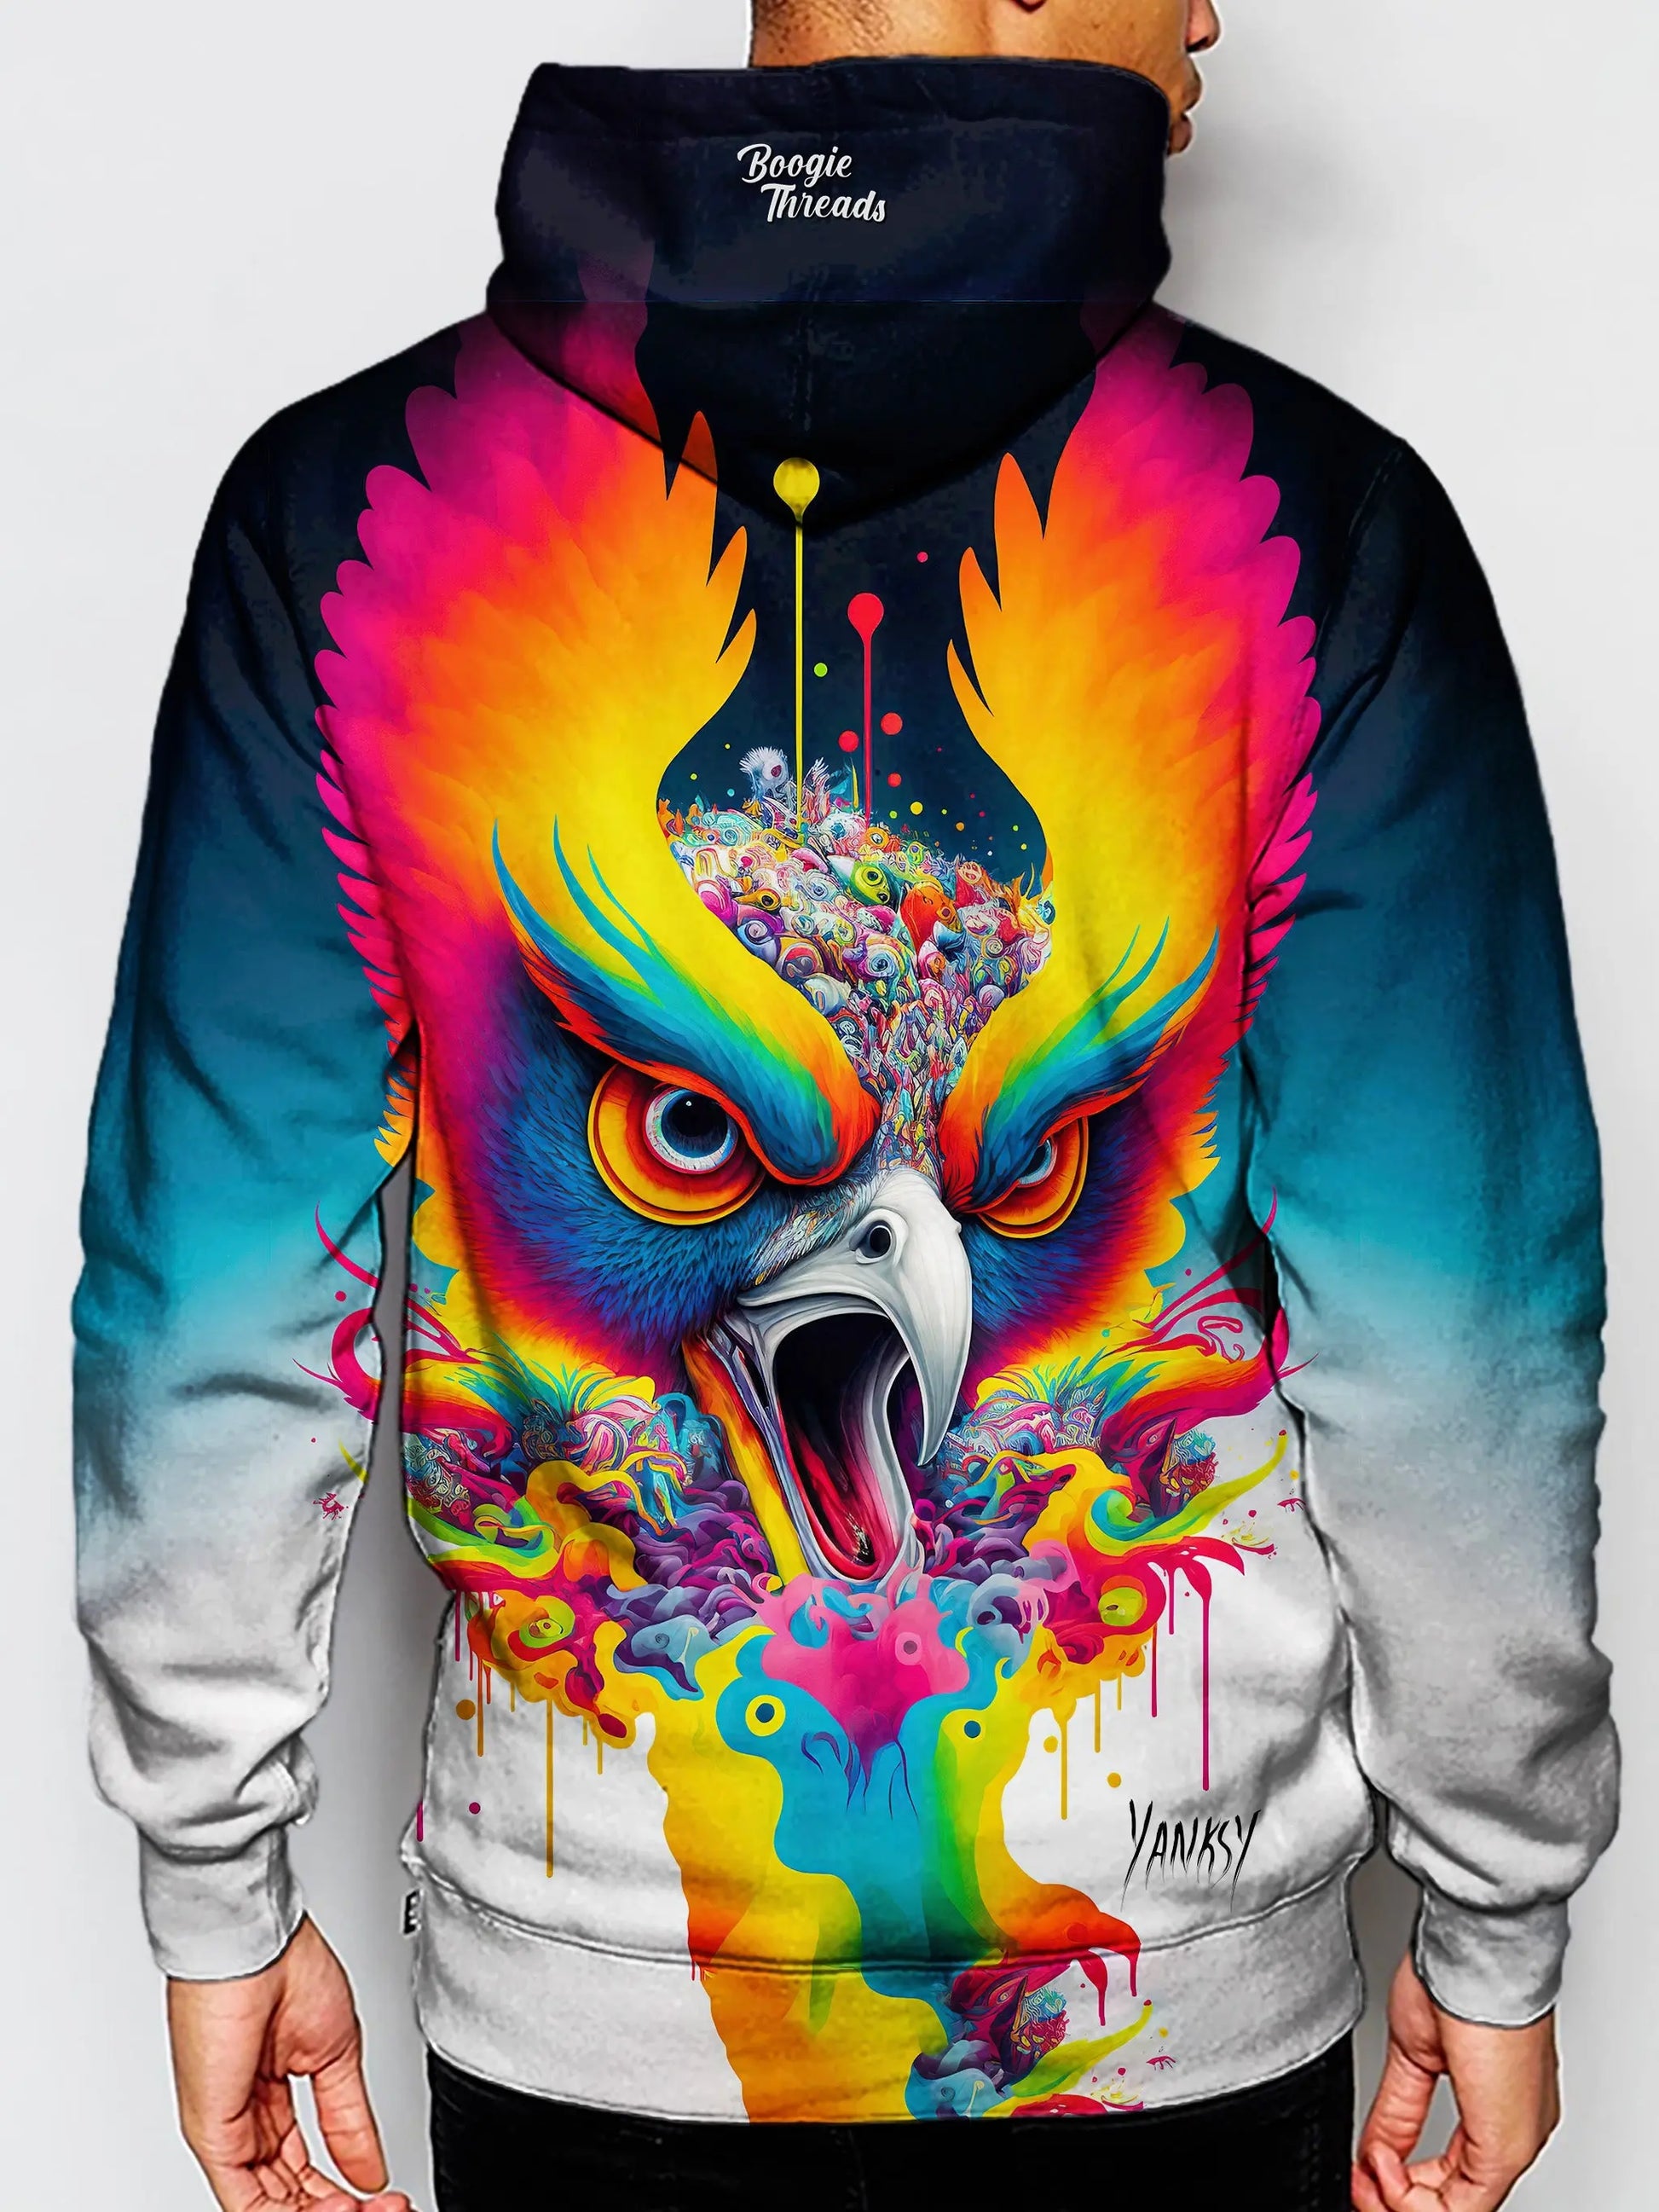 Make a splash with this bright and colorful hoodie